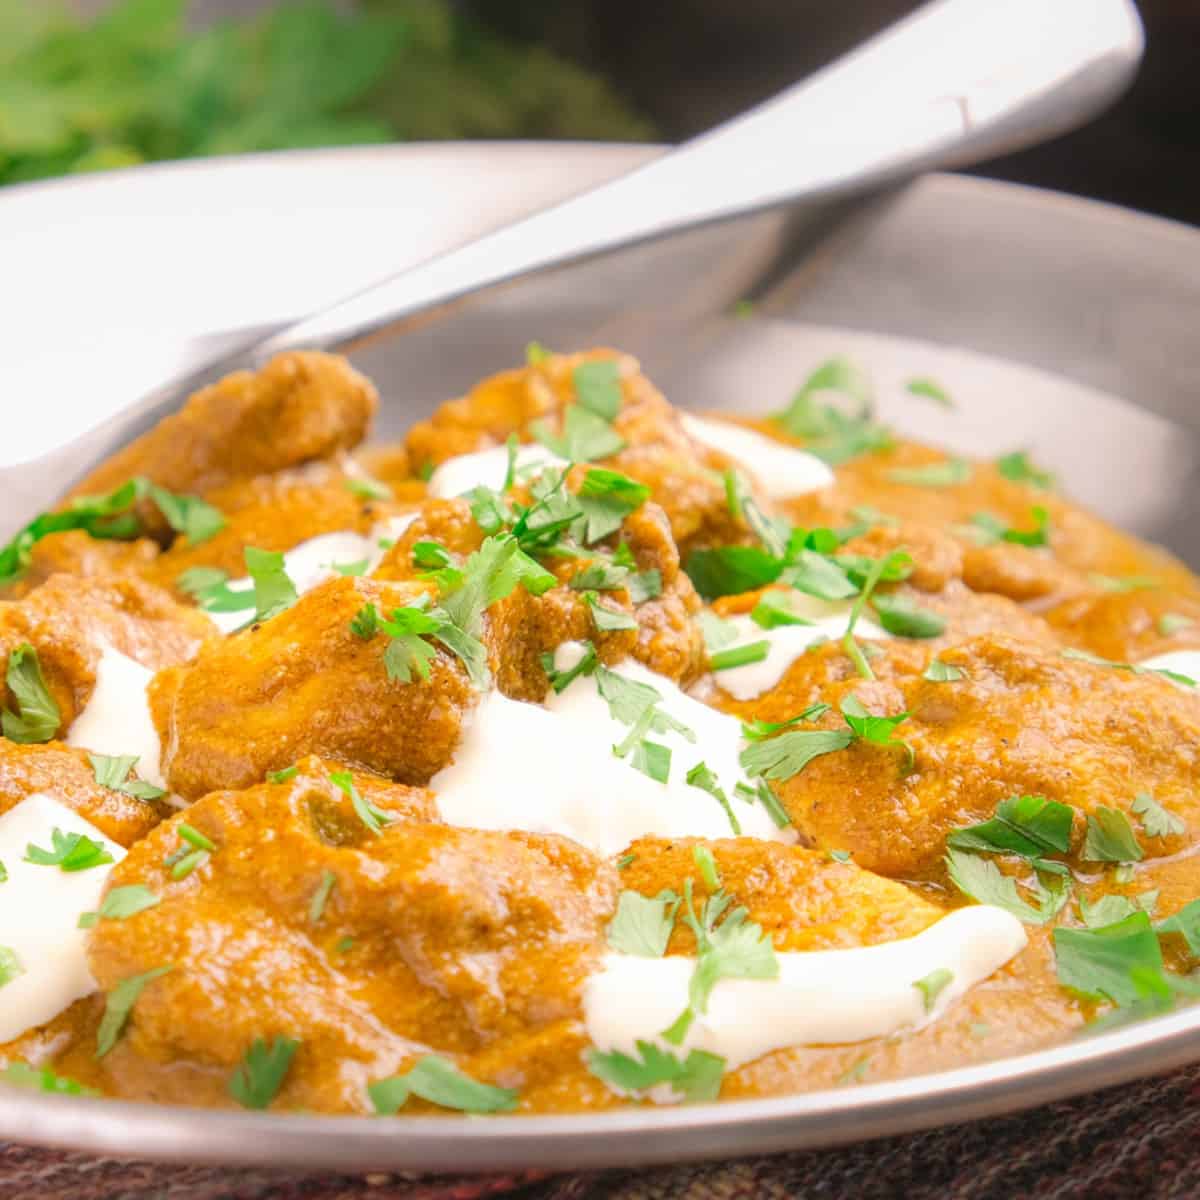 Keto Indian butter chicken garnished with green herbs in a serving dish.